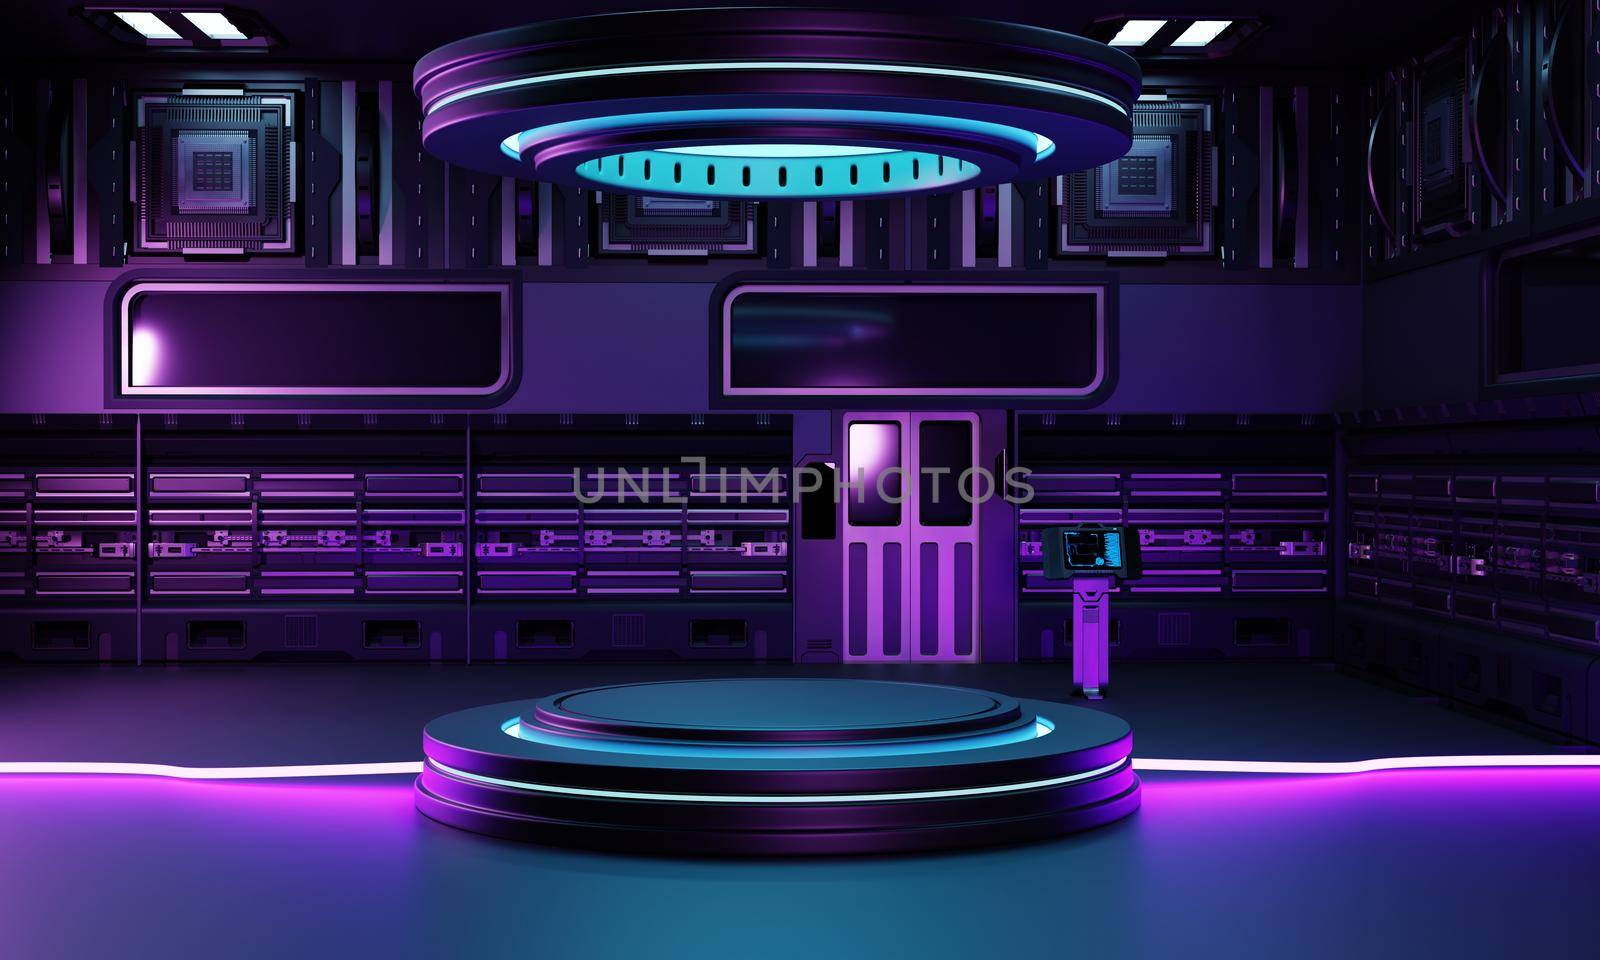 Inside spaceship laboratory interior architecture and empty podium for cyberpunk product presentation. Technology and Sci-fi concept. 3D illustration rendering by MiniStocker